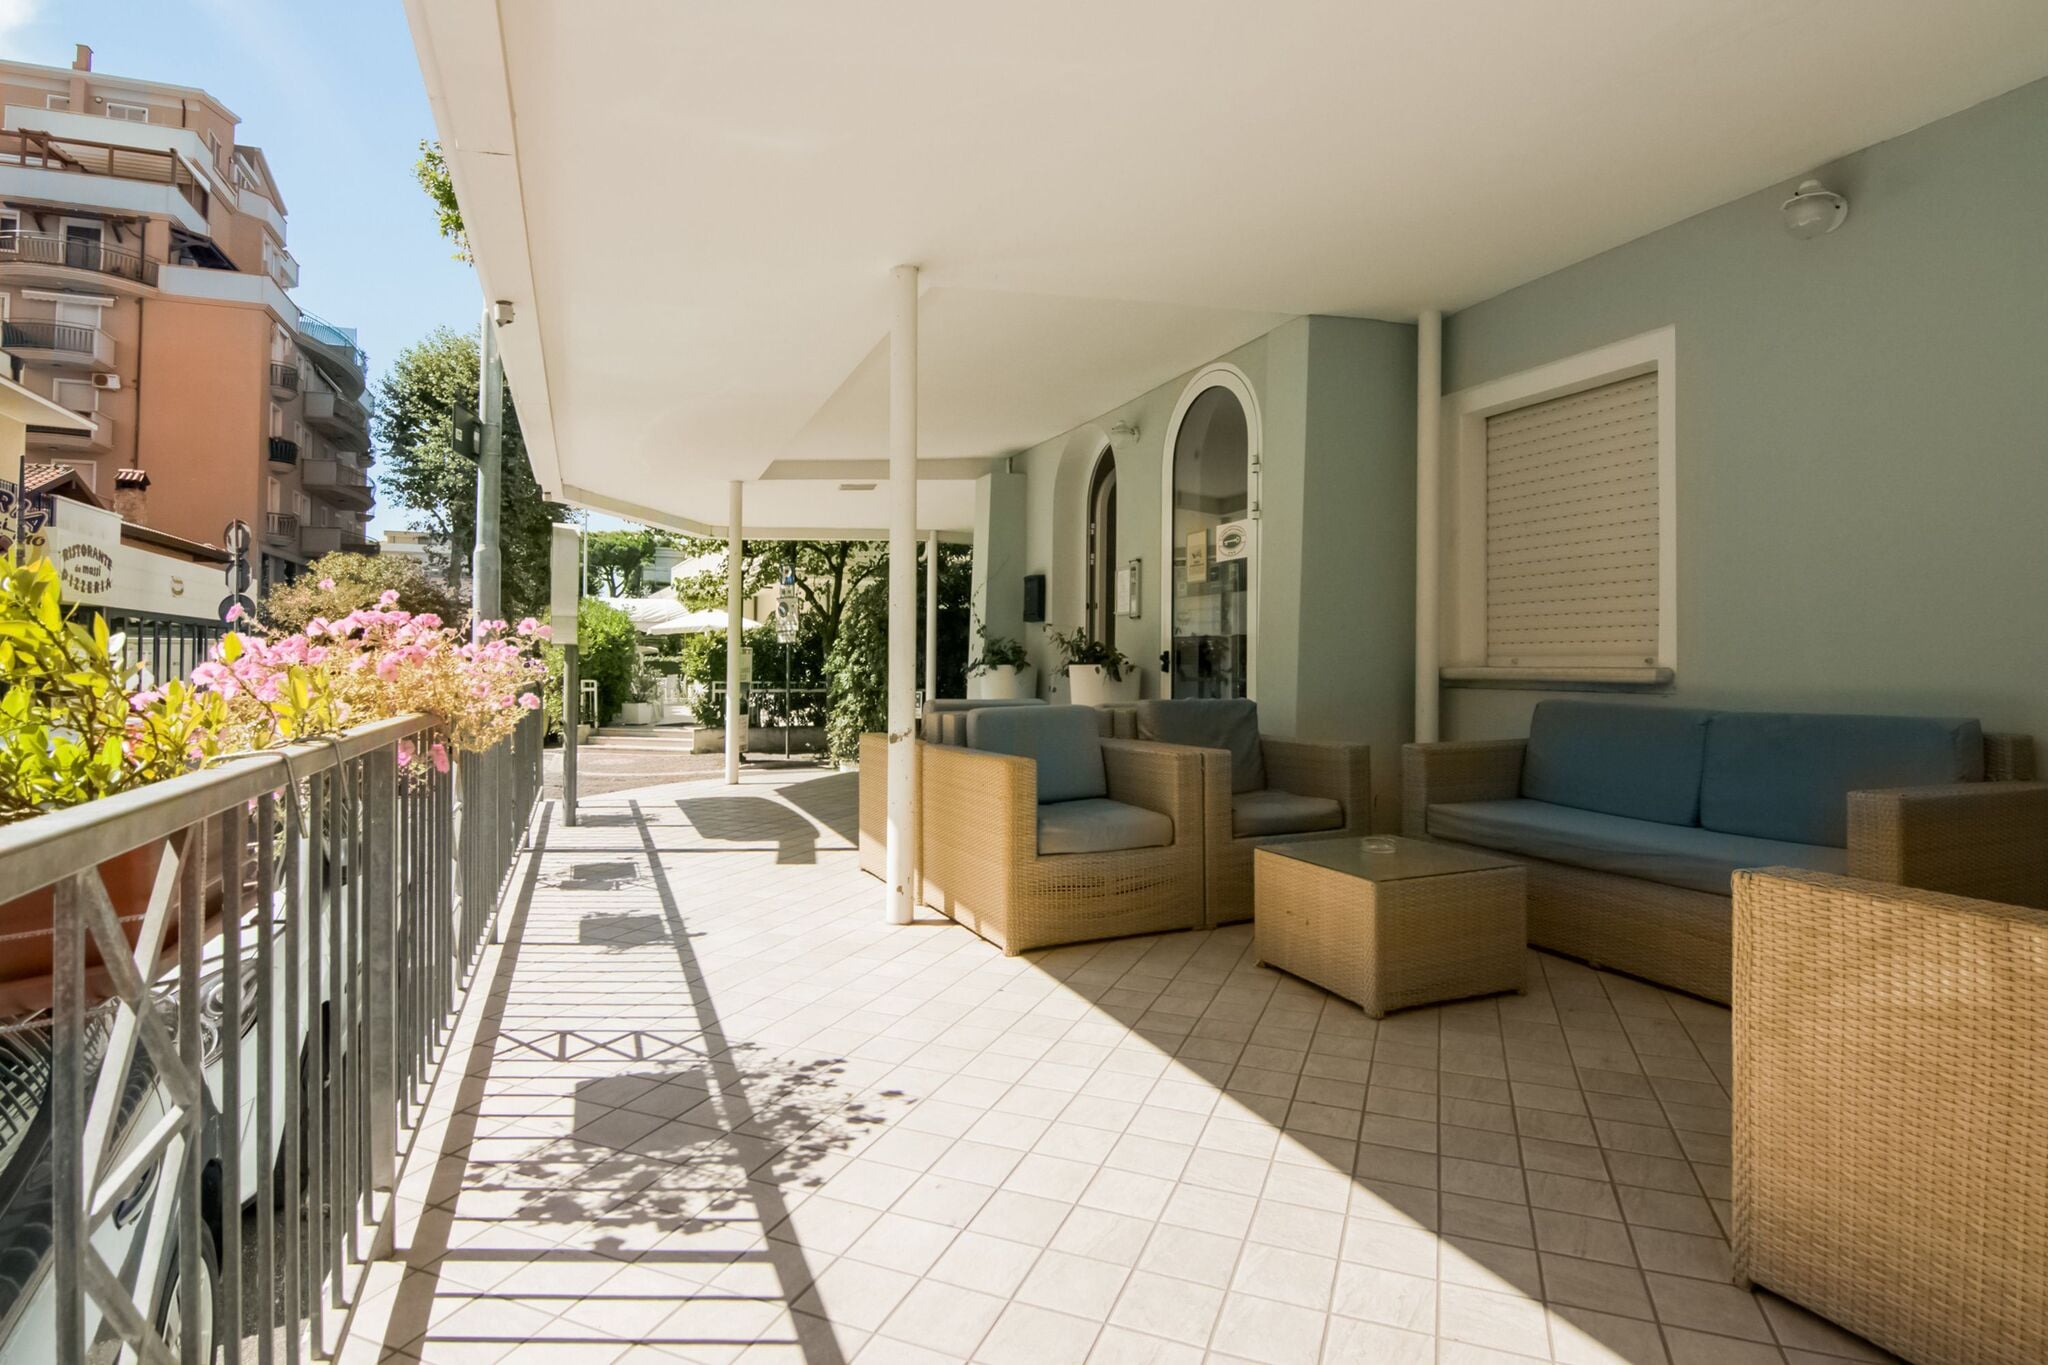 Residence located in a quiet area of â€‹â€‹Riccione, 50 meters from the sea